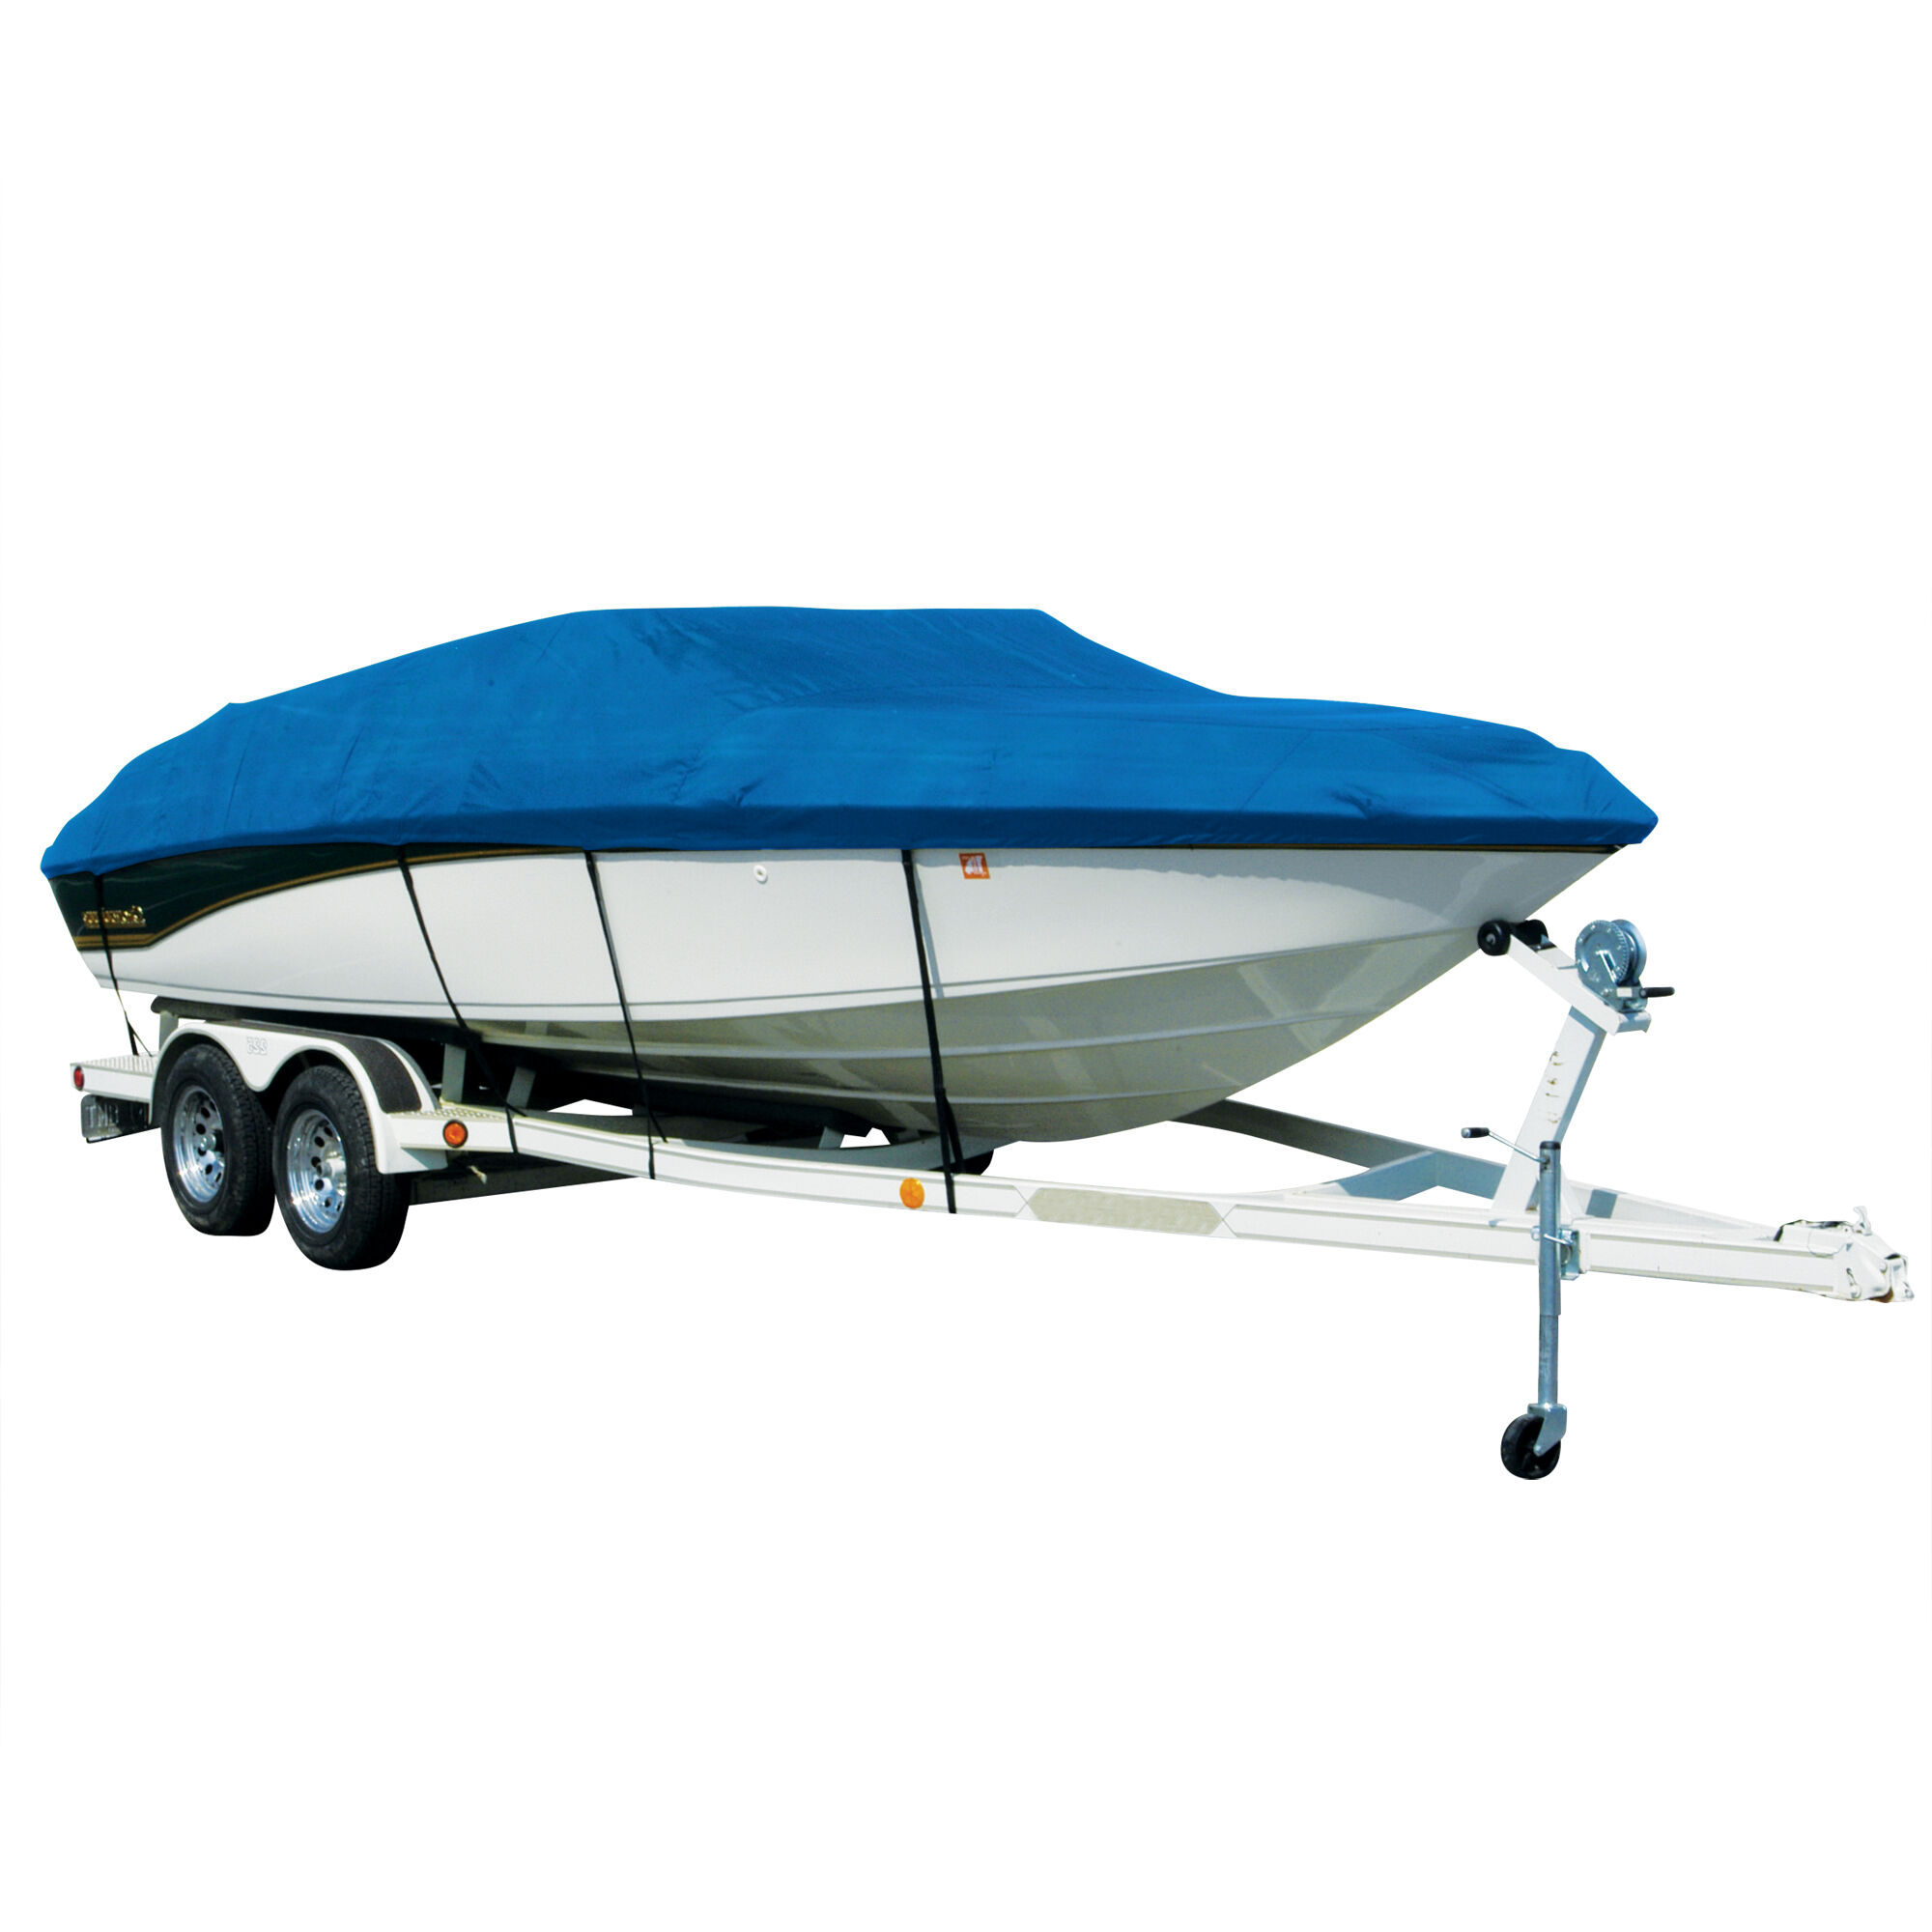 Covermate Sharkskin Plus Exact-Fit Cover for Zodiac Pro Open 650 Pro Open 650 w/ Hard Top w/ Strb Console O/B. Blue